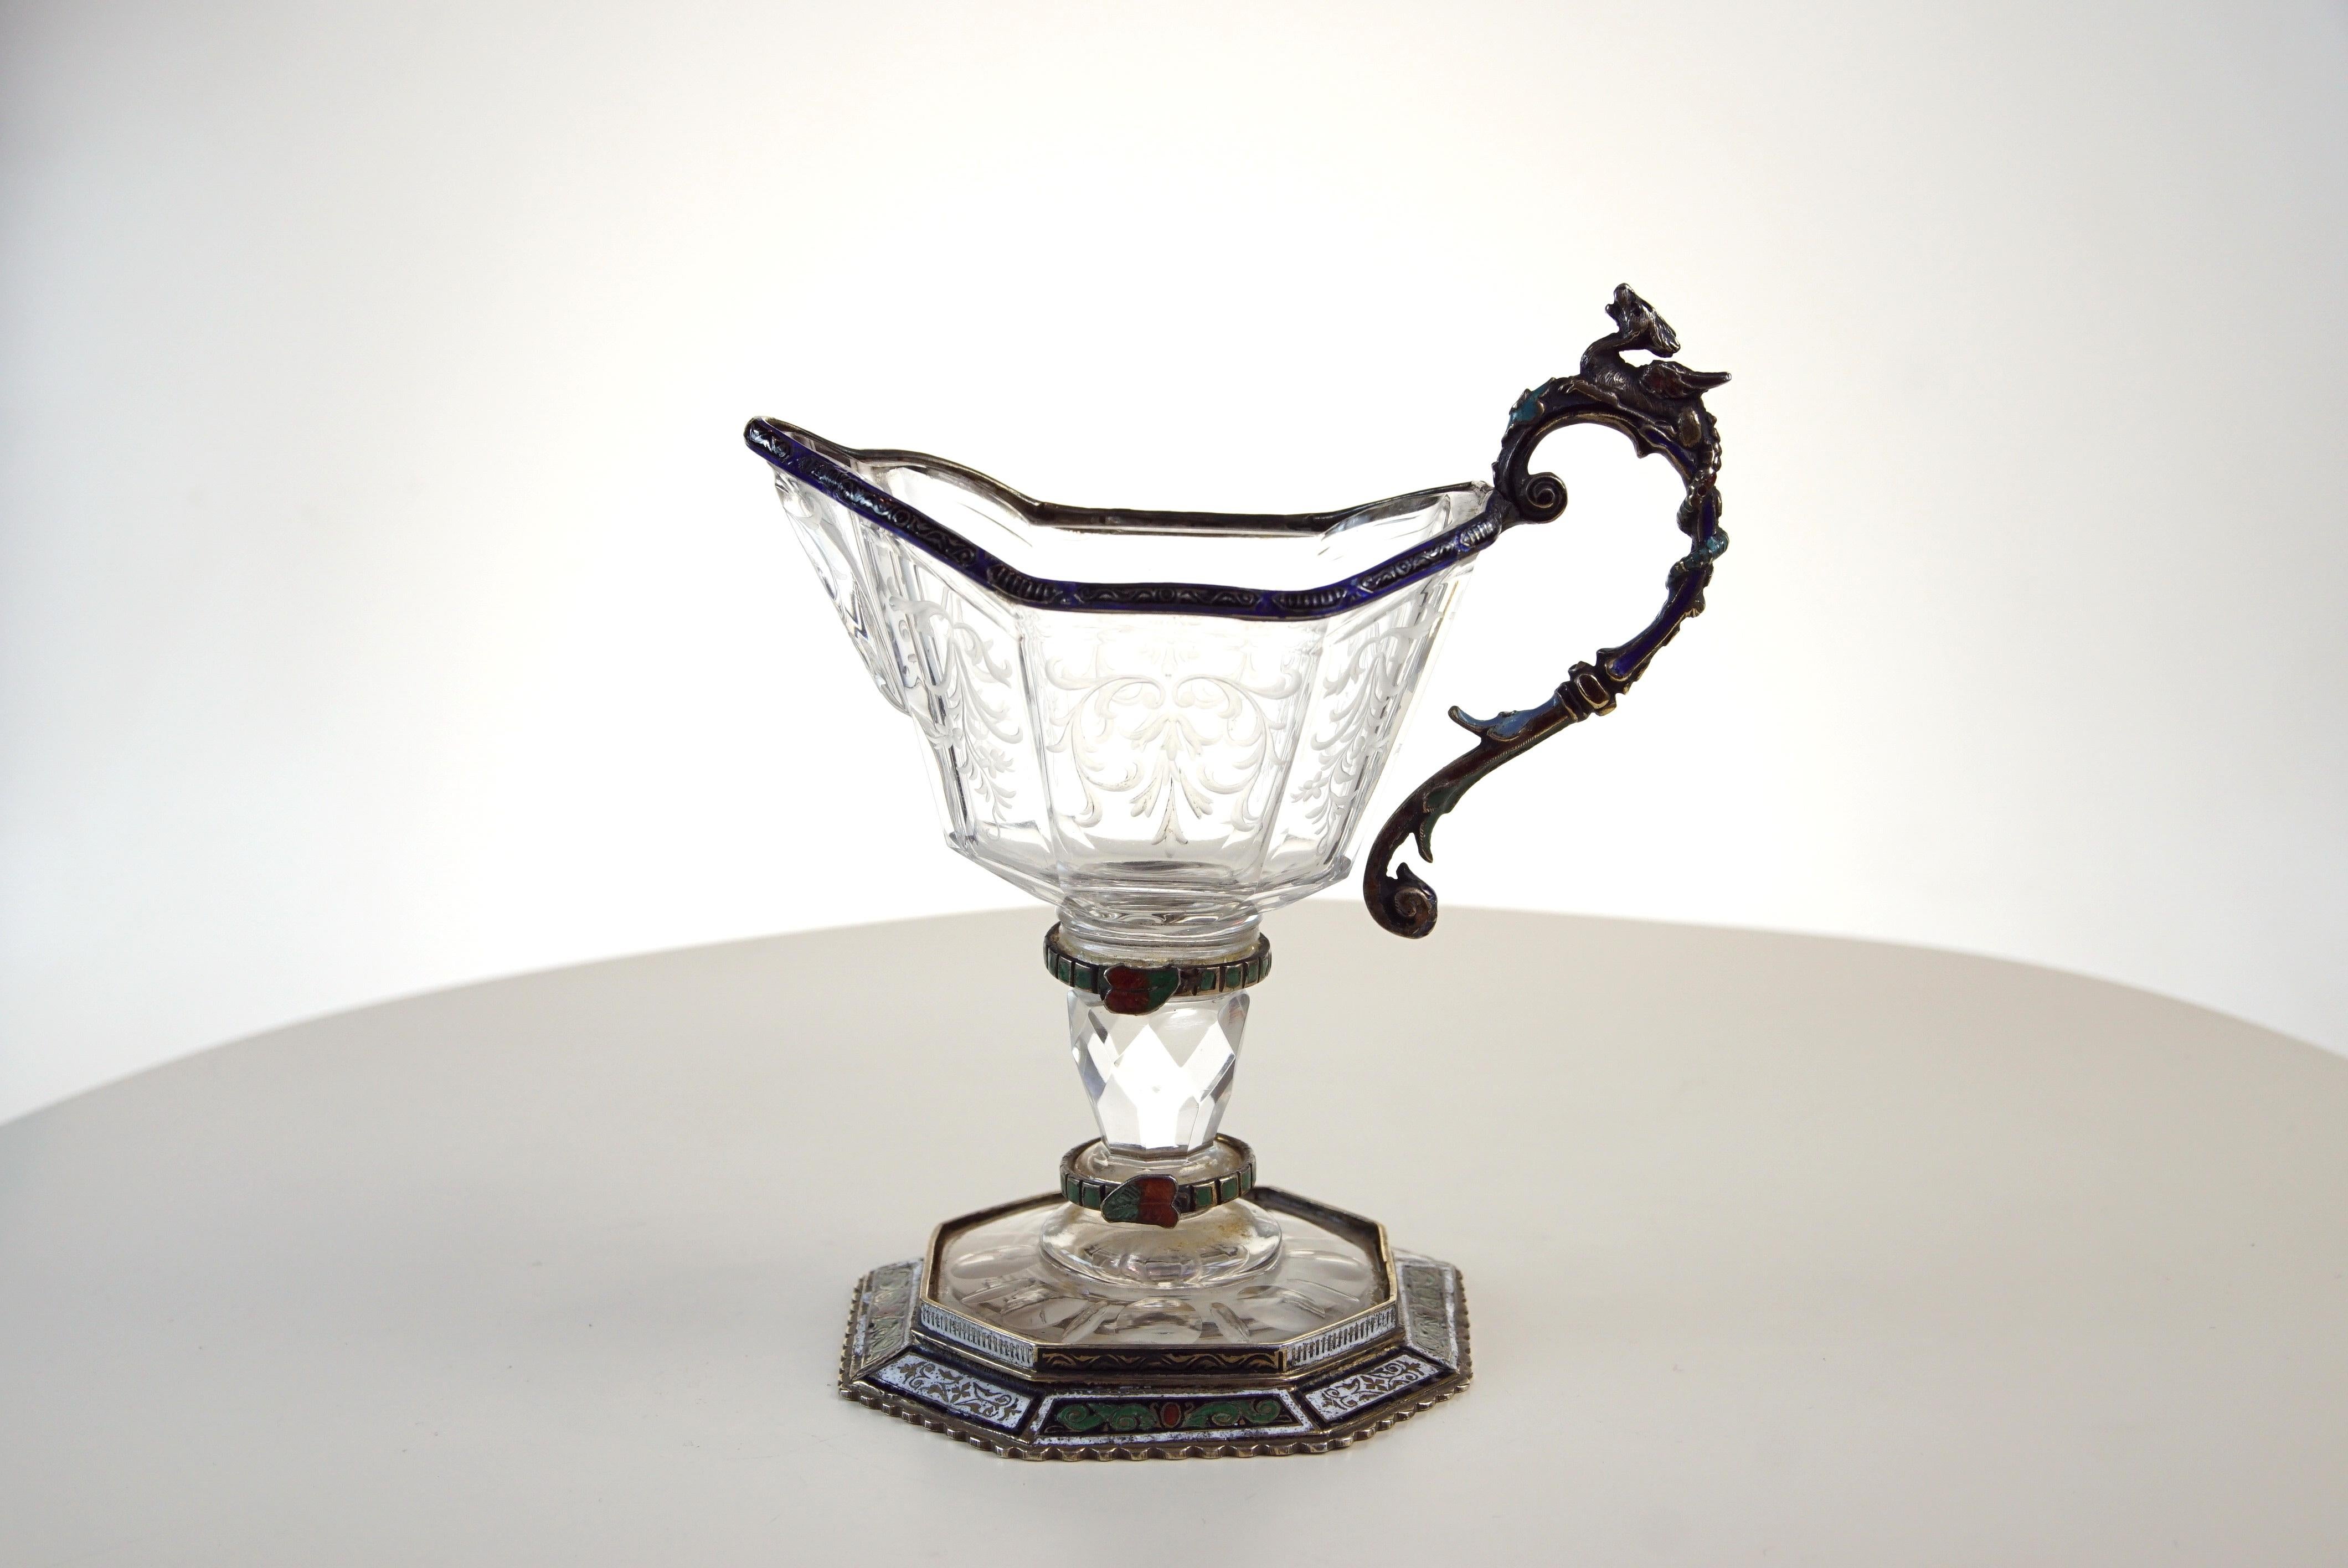 A fine silver, enamel, and engraved rock crystal jug, circa 1880,
attributed to Hermann Bohm

The rock crystal body engraved with scrolls ,The handle with an enameled mystical Bird supported by a rock crystal column on an engraved rock crystal